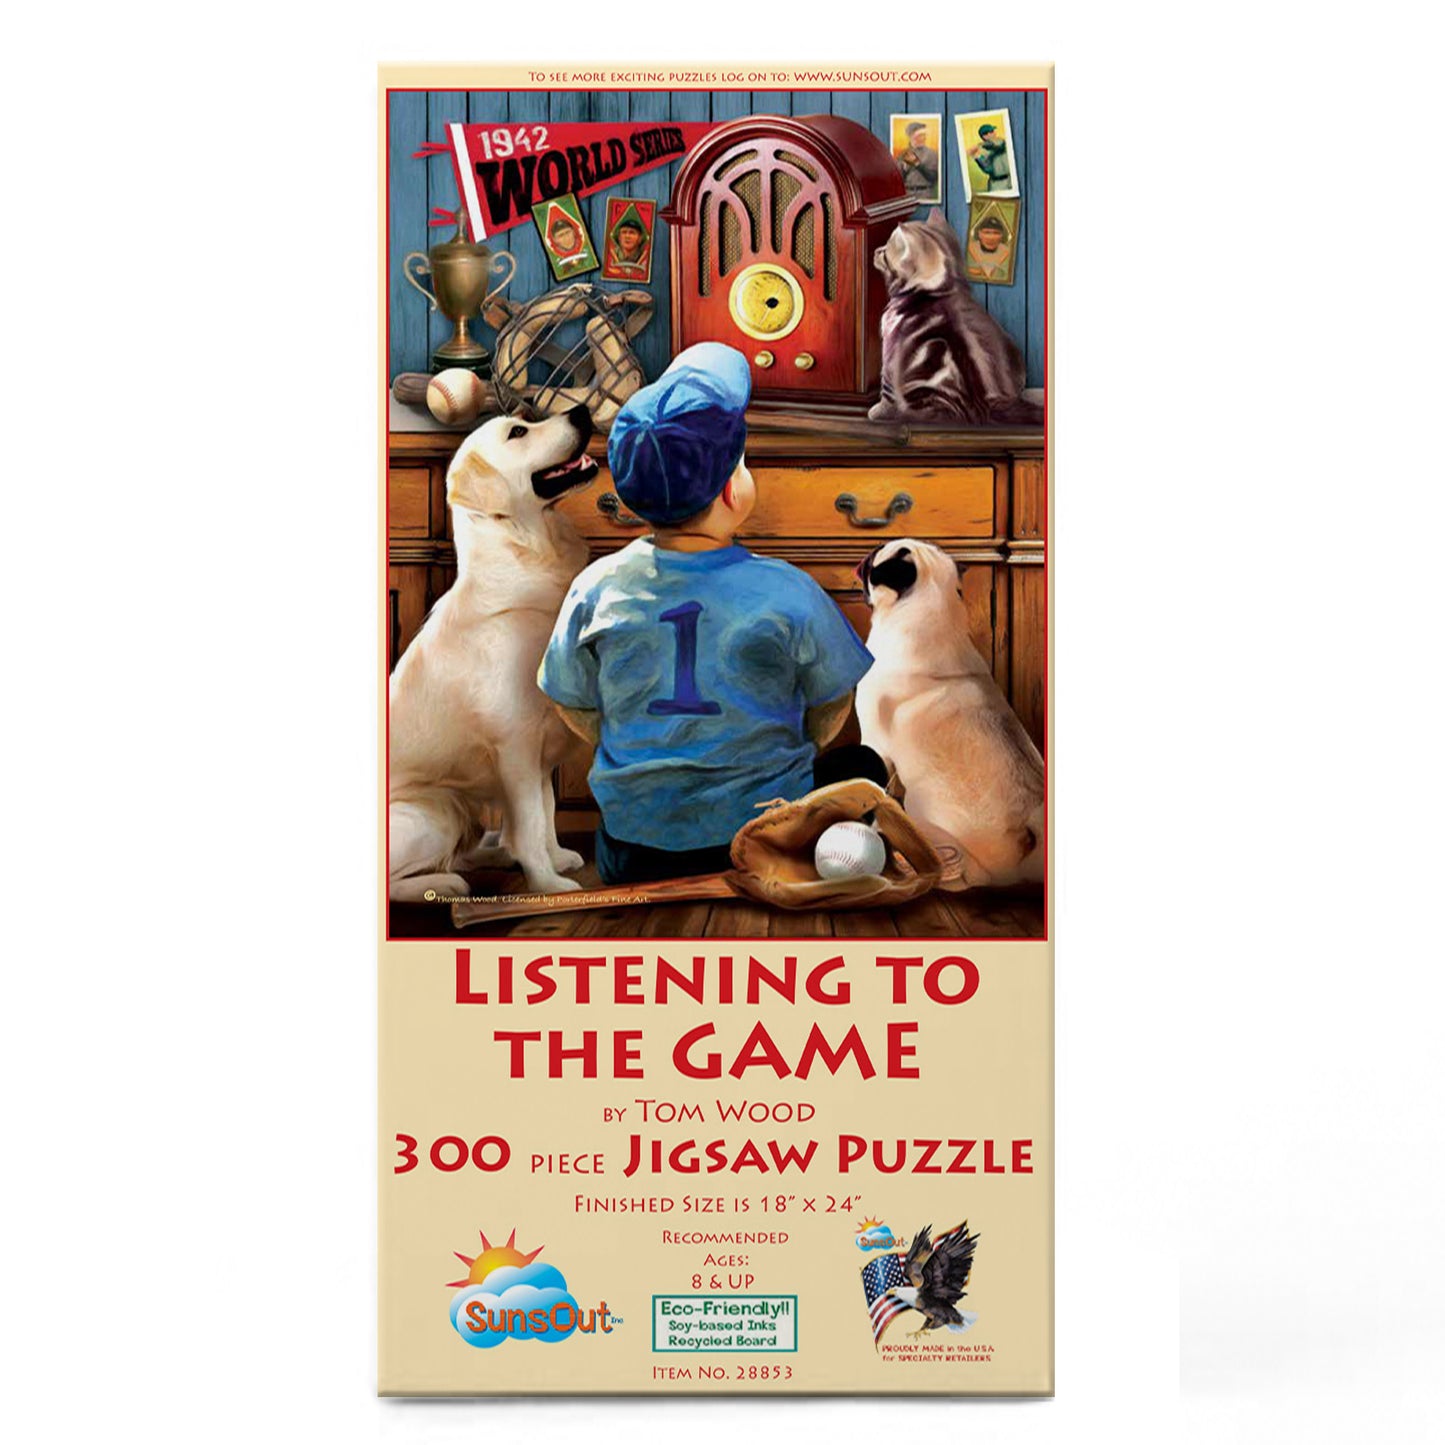 Listening to the Game - 300 Piece Jigsaw Puzzle